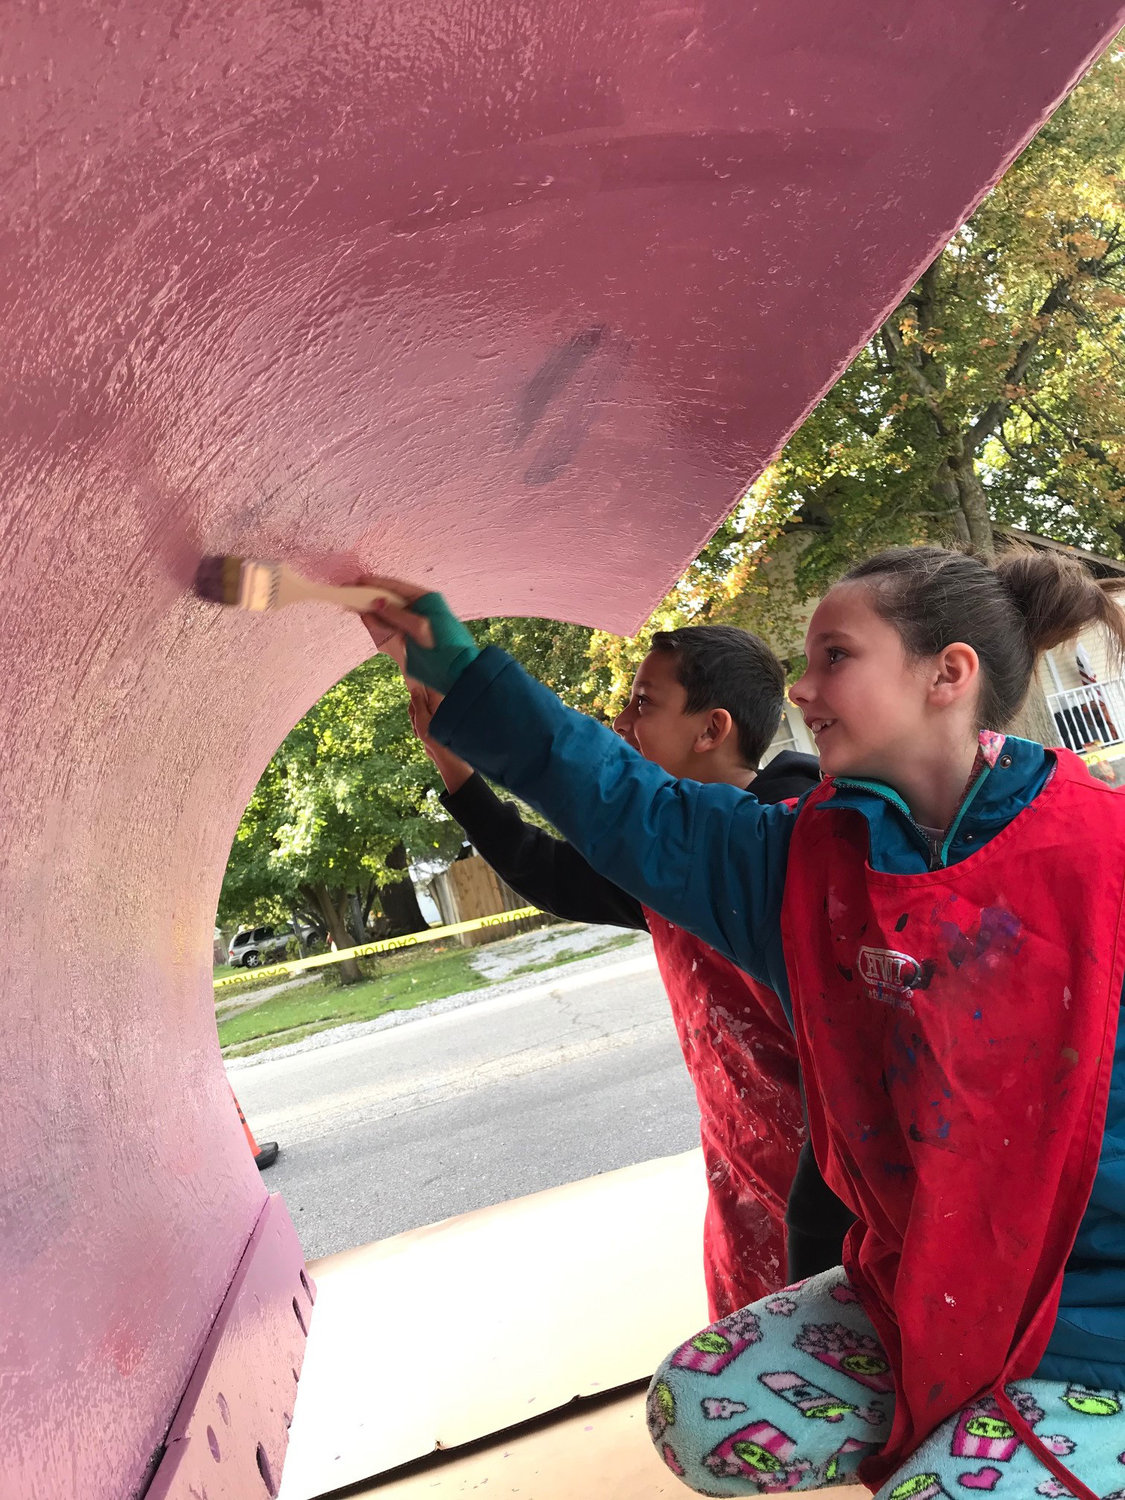 Students paint the underside of a plow, which will appear in the Crawfordsville Christmas parade.